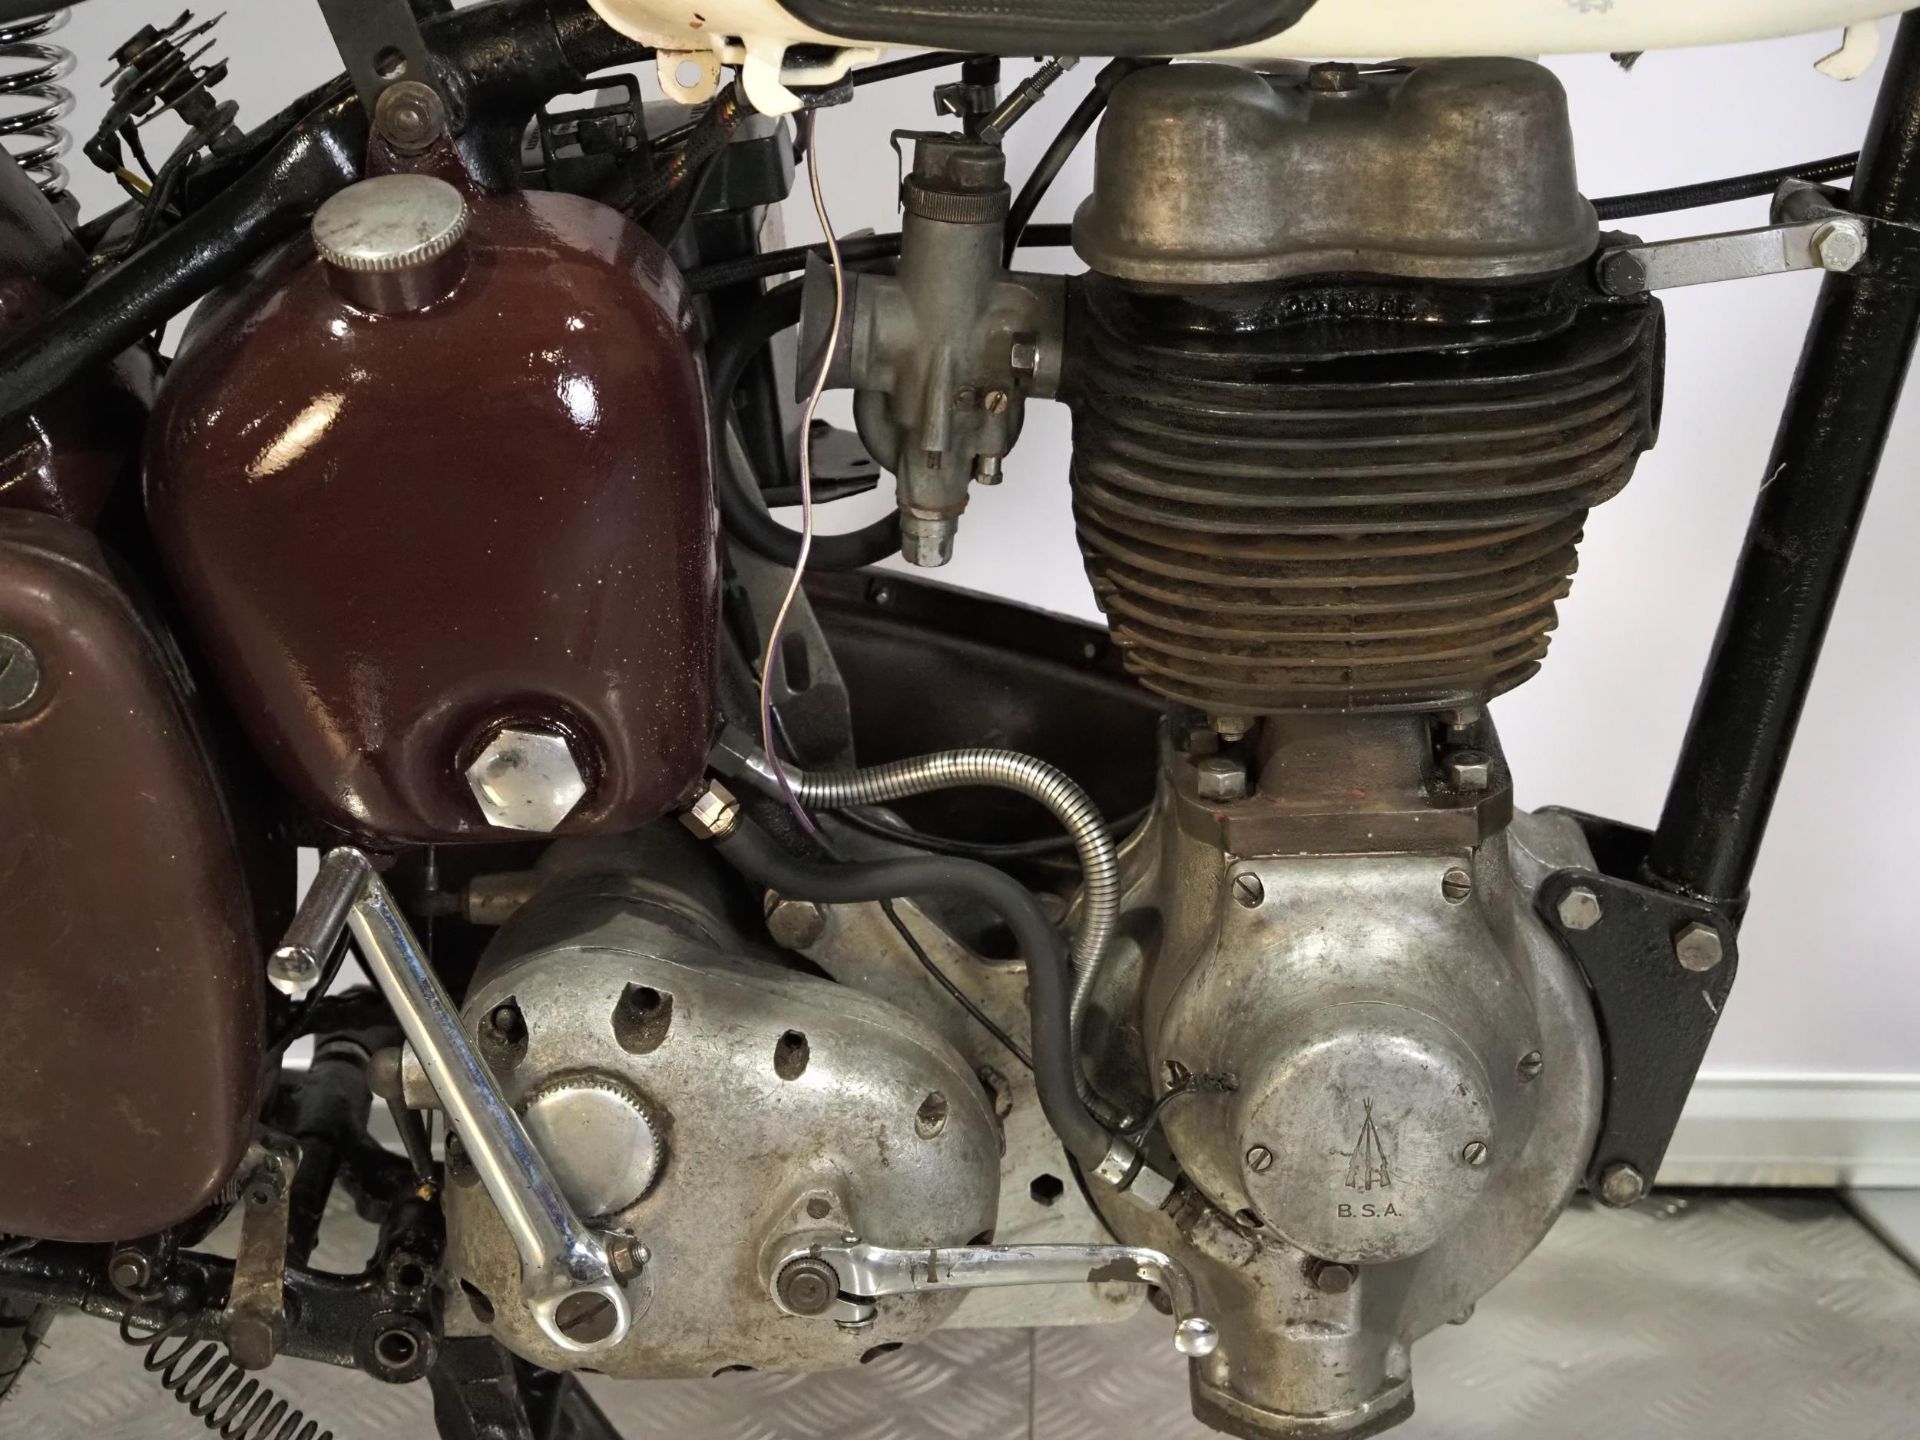 BSA C11G motorcycle project. 1955. 250cc. Frame No. BC11S 56721 Engine No. BC11G 23059. Does not - Image 4 of 6